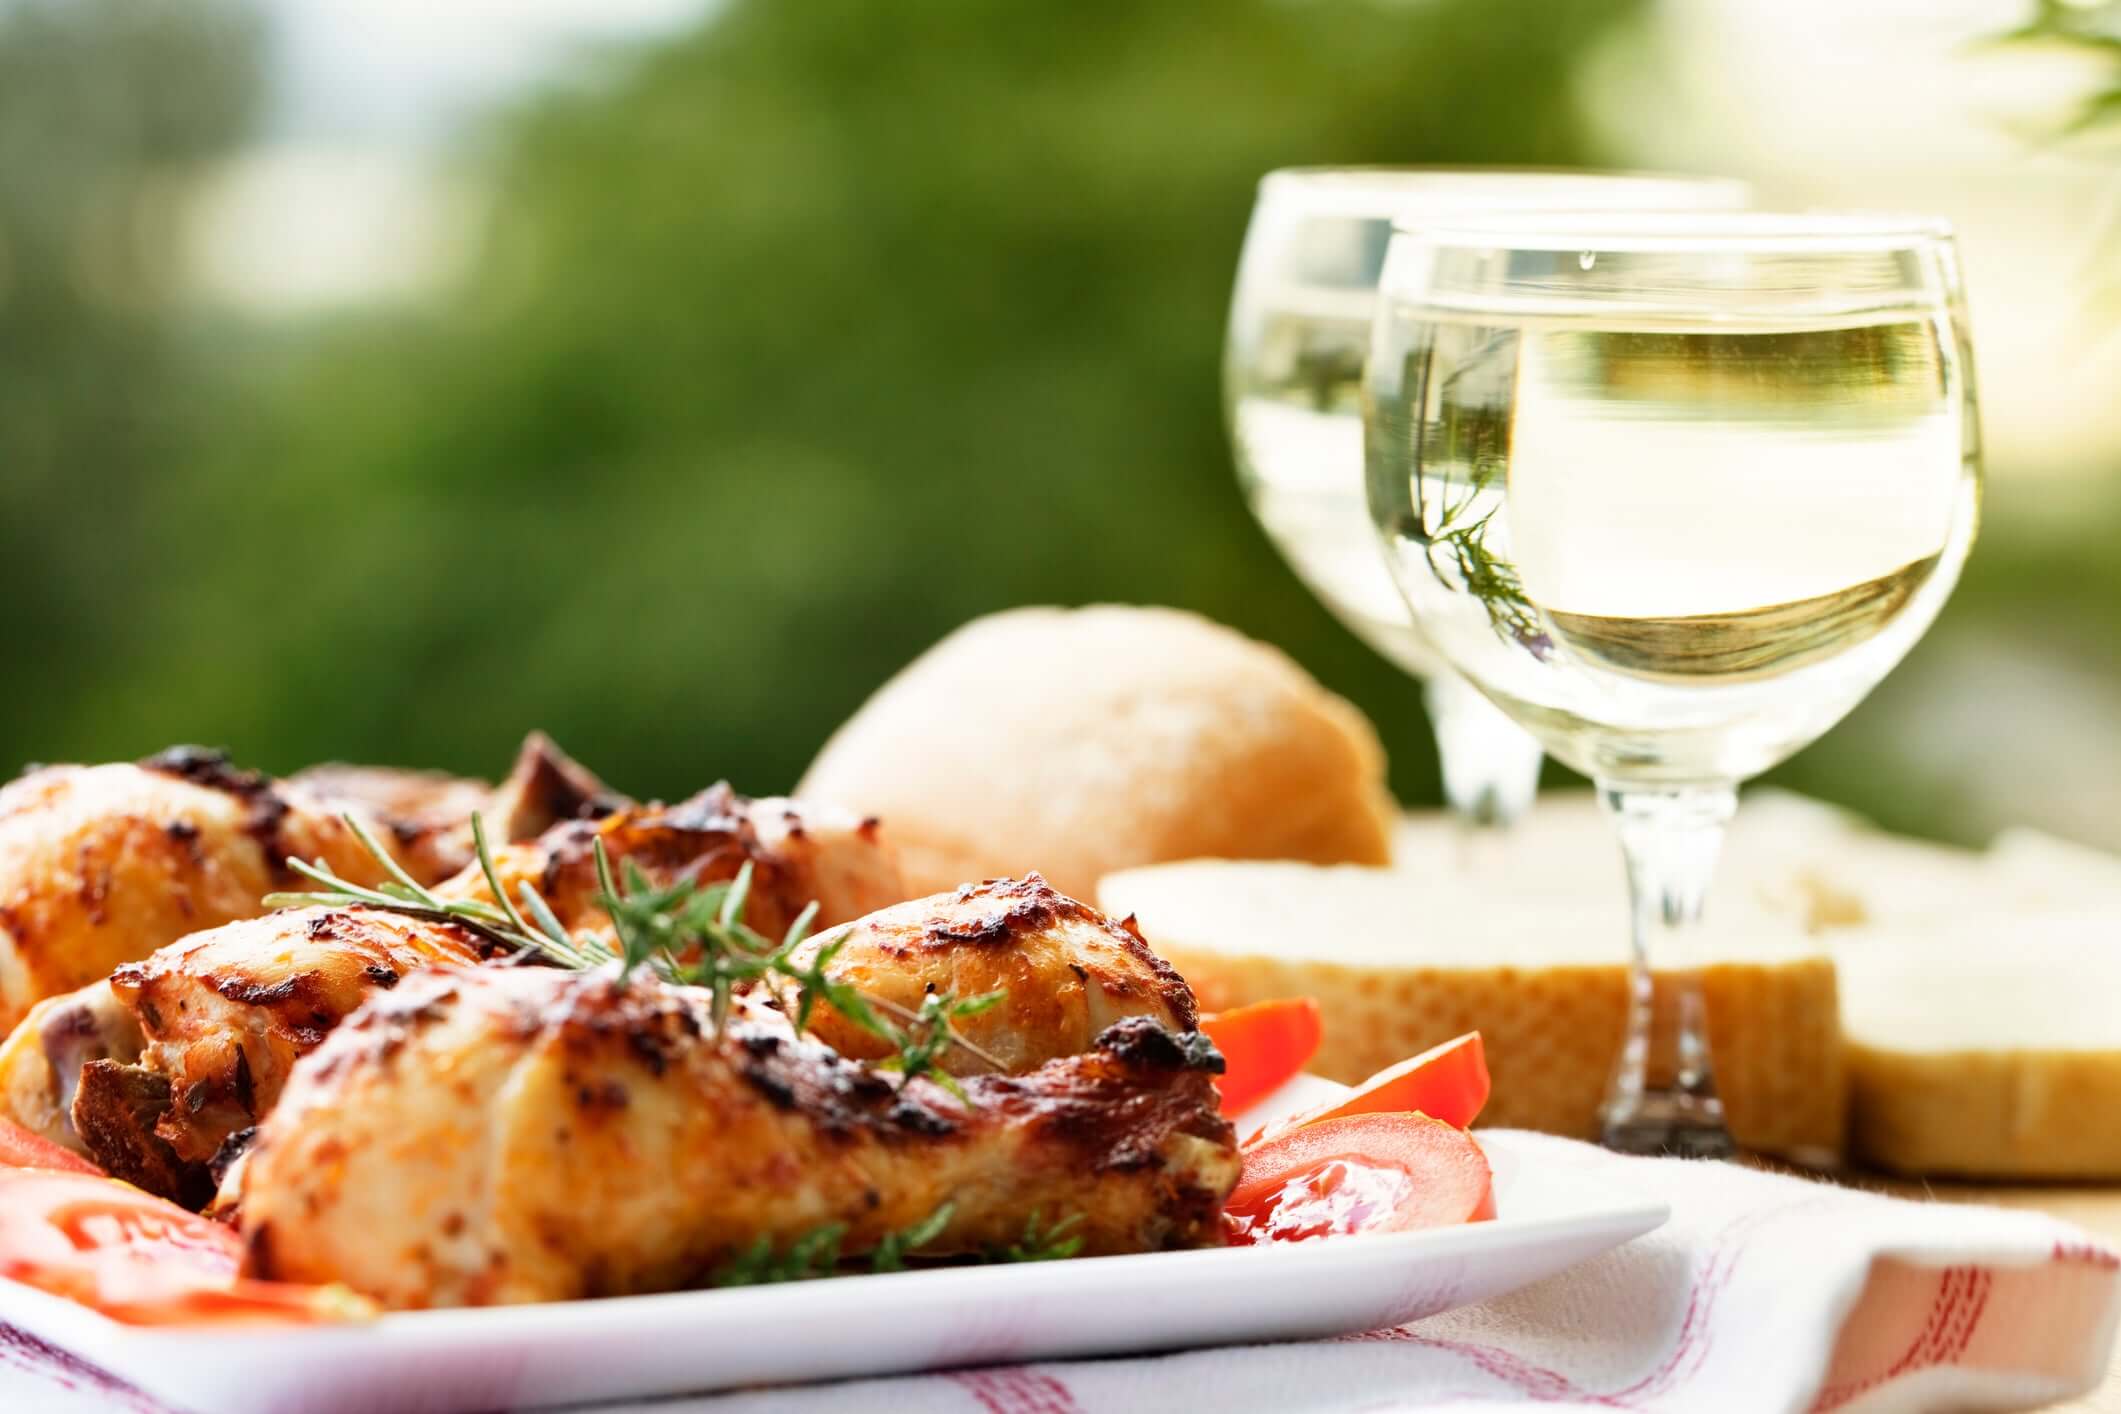 Pairing Wines with Poultry